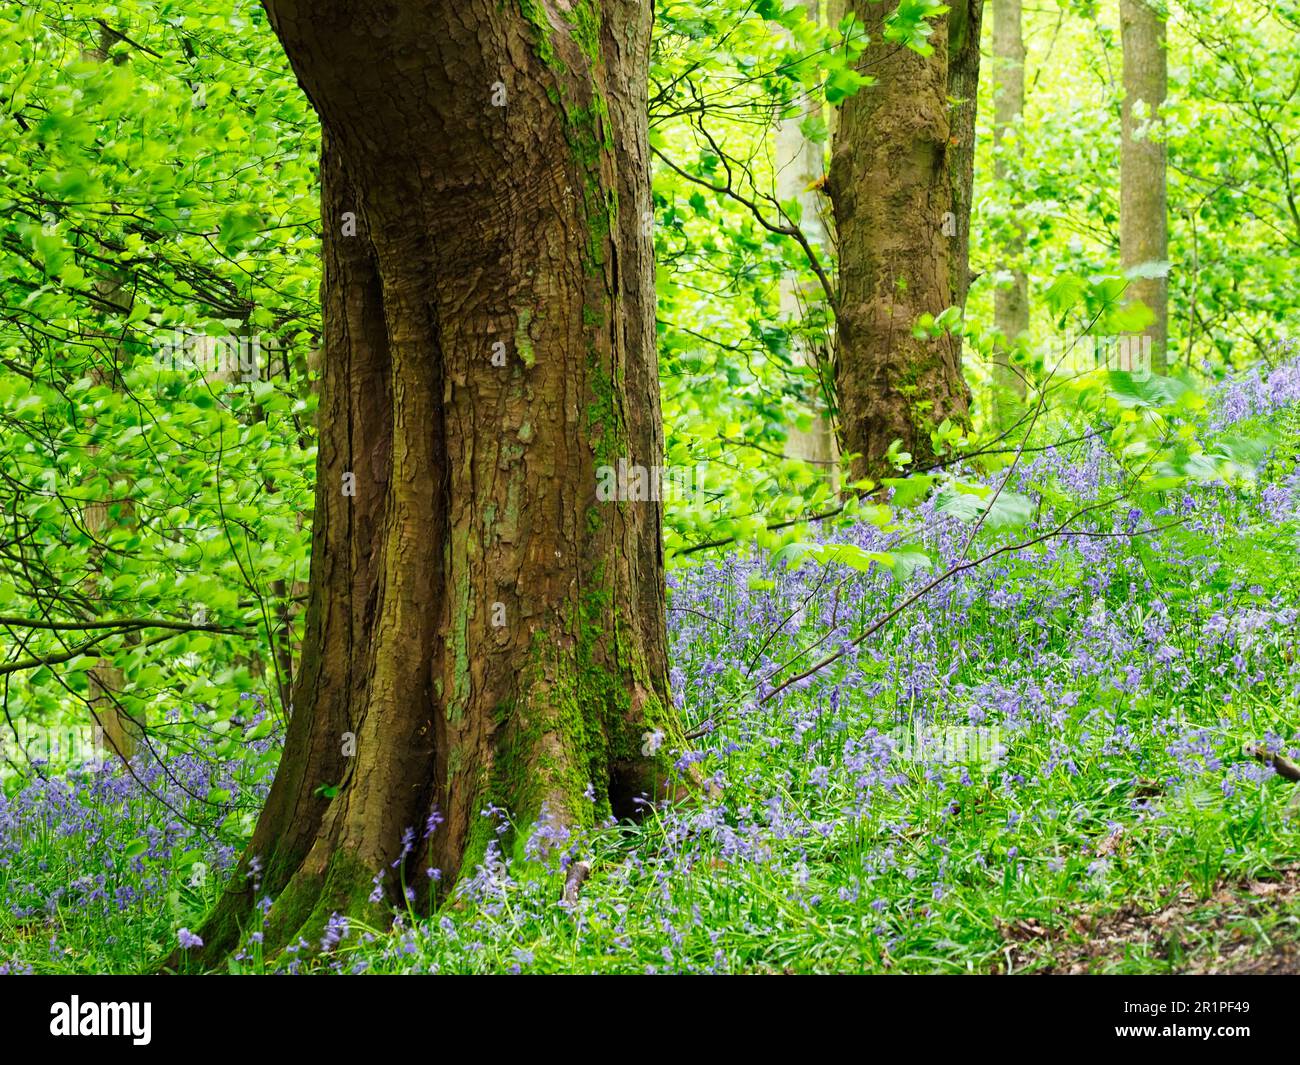 Bluebells in fiore nei boschi di Harewood vicino a Leeds West Yorkshire Inghilterra Foto Stock